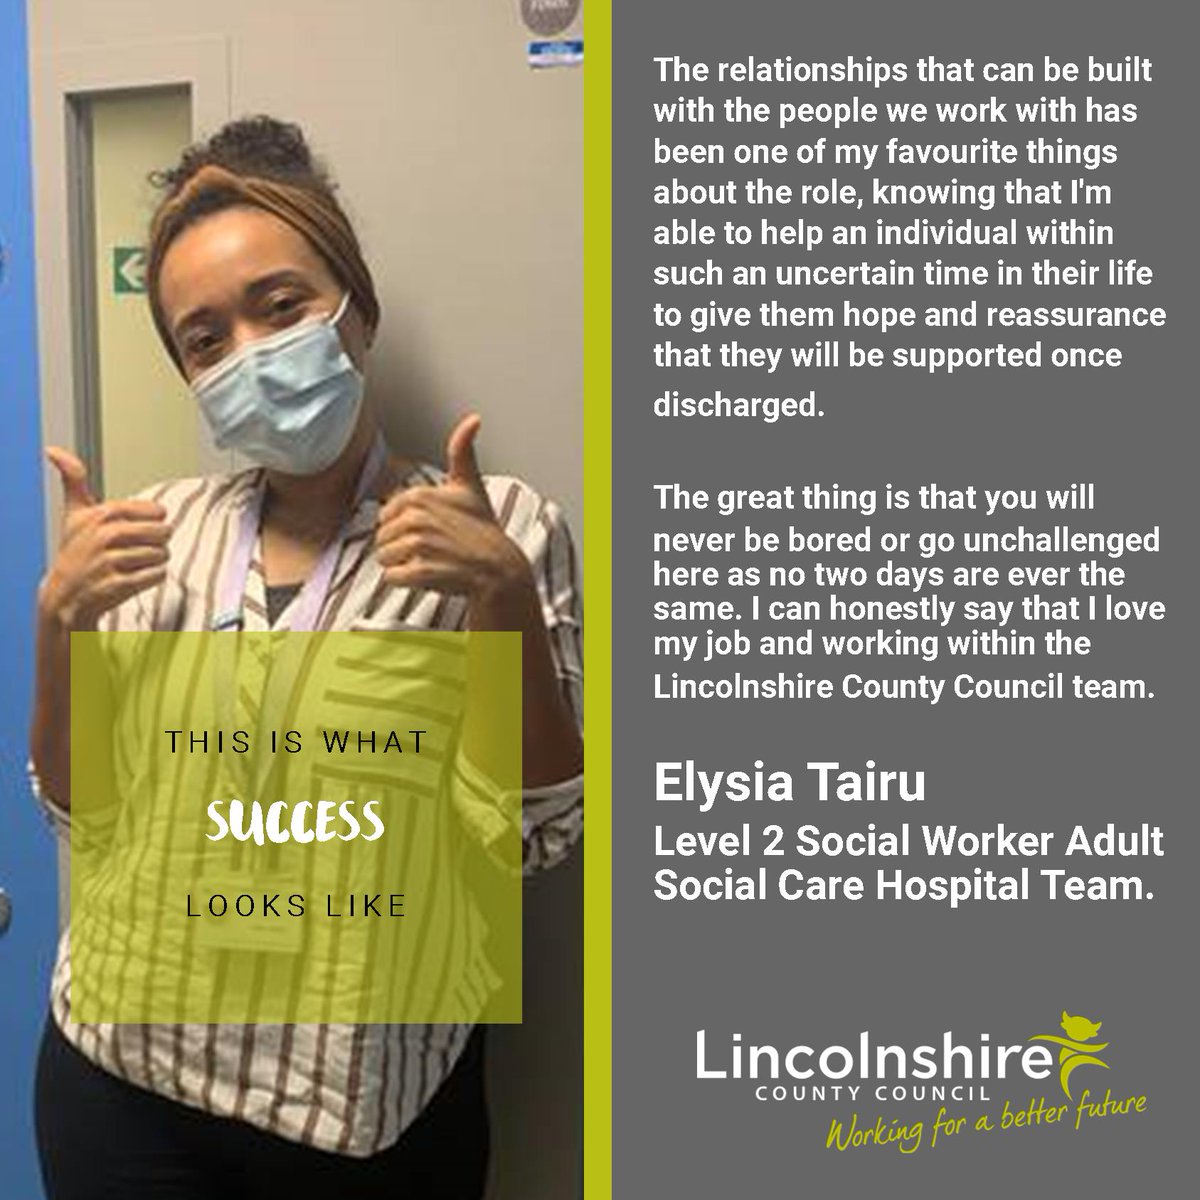 Come and join Elysia in our Adult Social Care Hospital Team. We are recruiting for Lead Practitioners and Social Workers now! qoo.ly/3ambpj #socialworkrecruitment #lincsccjobs #lincolnshire #recruiting #recruitment #Lincoln #Grantham #LCC #Boston #Peterborough